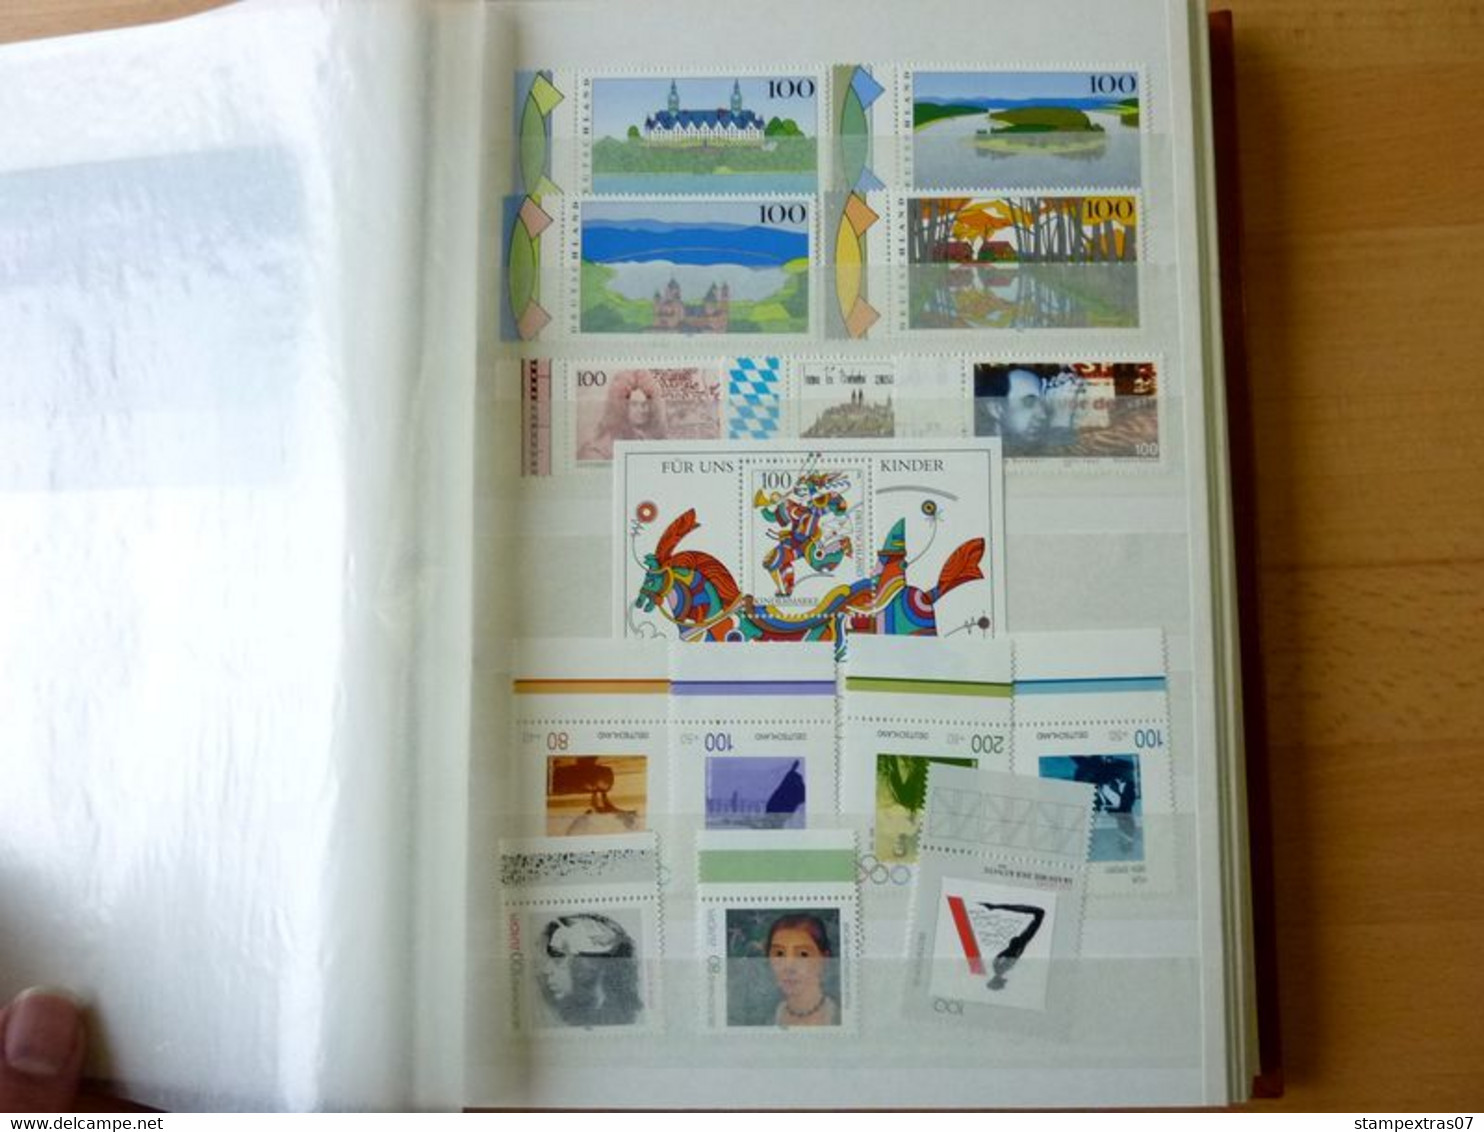 MASSIVE GERMANY STAMP COLLECTION (BRD + REICH + DDR...)